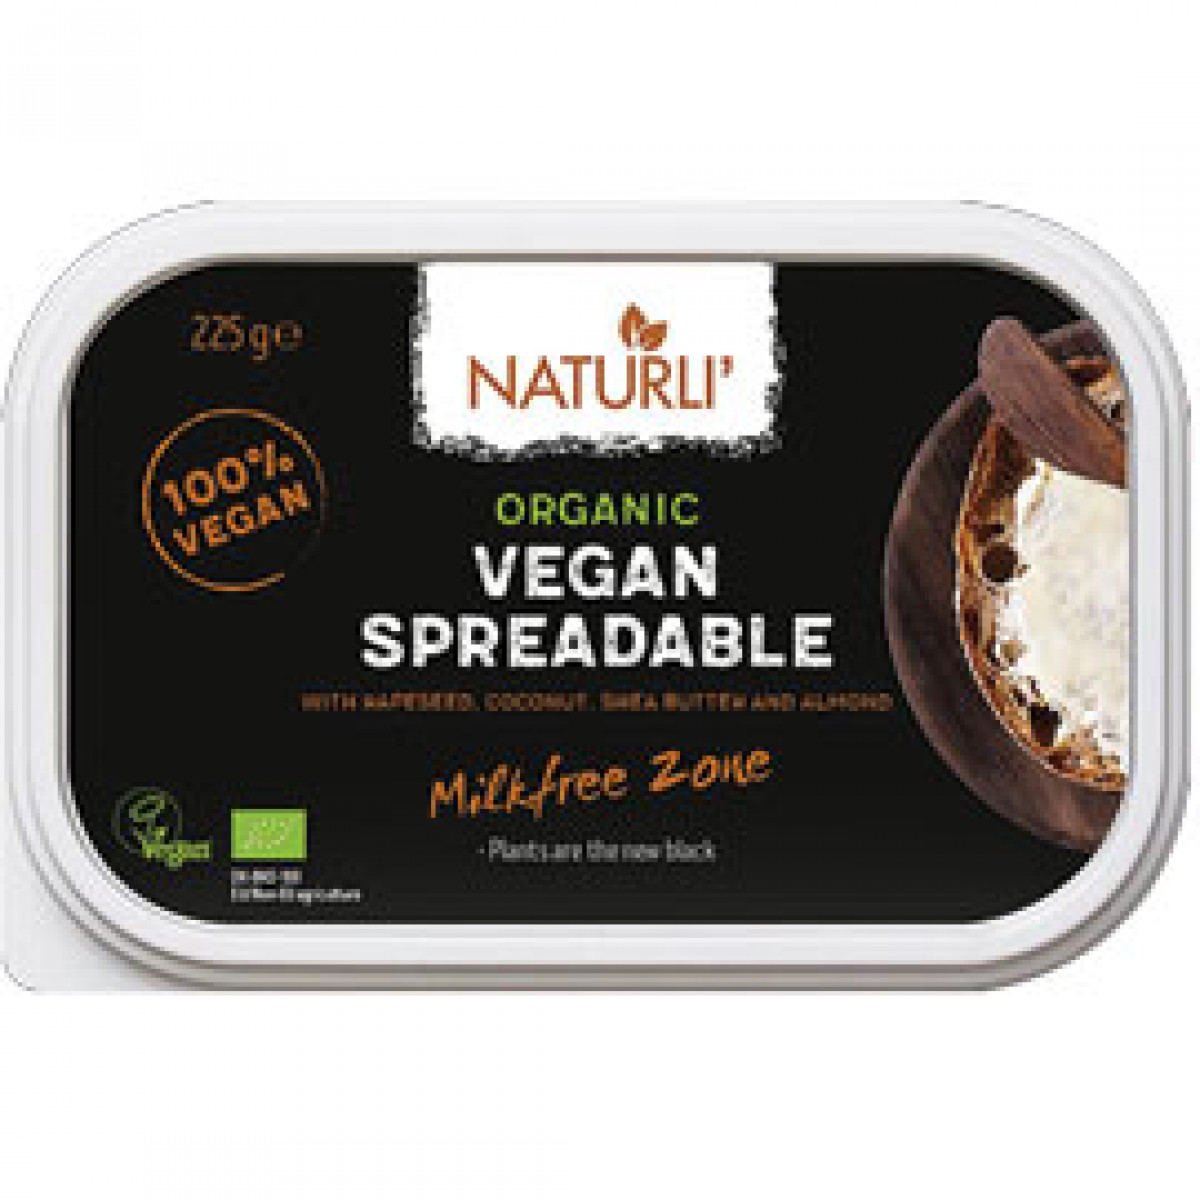 Product picture for Vegan Spreadable